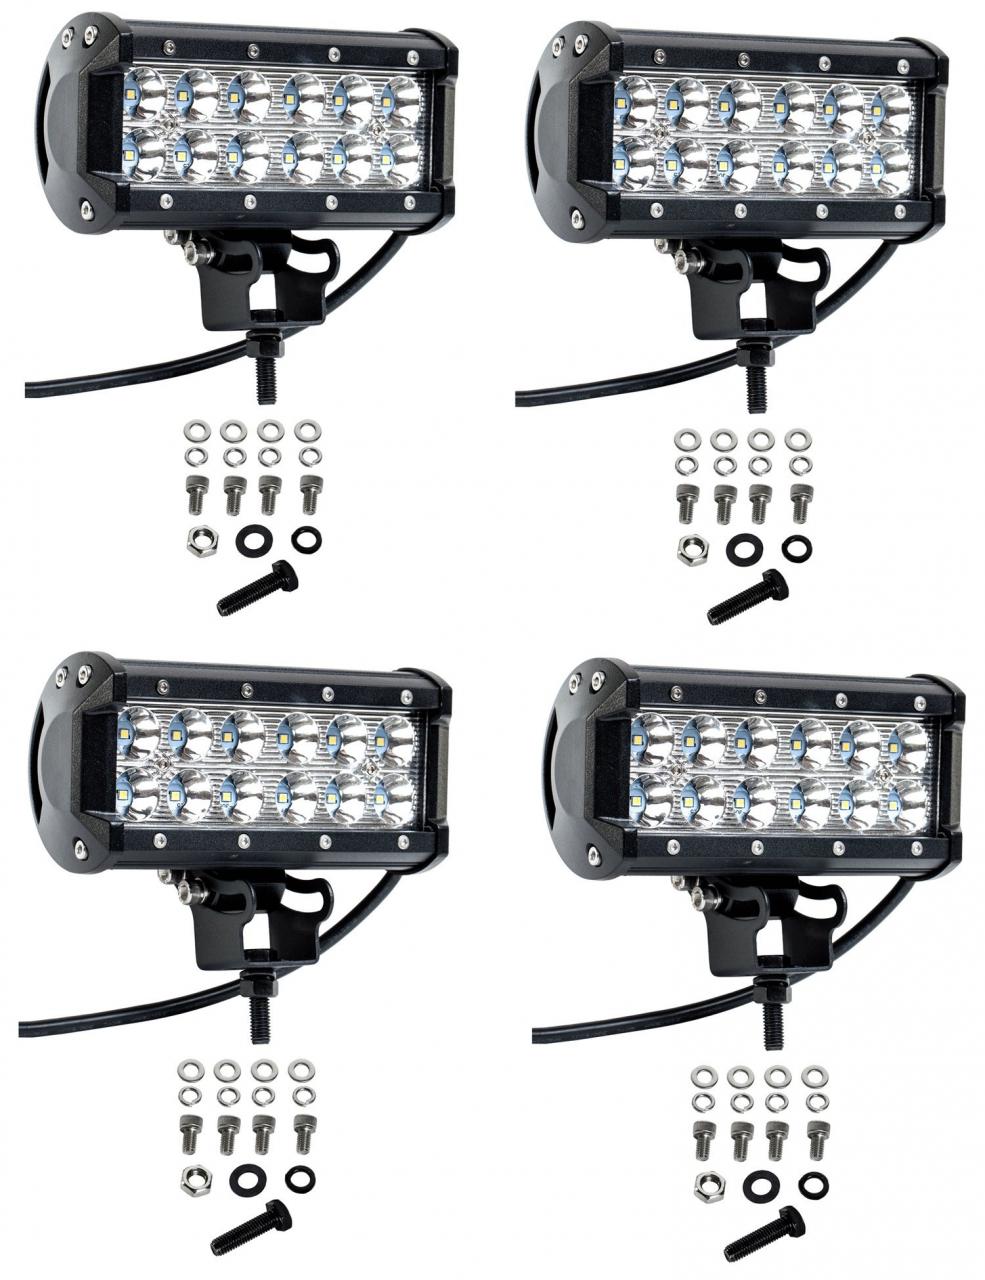 Cutequeen 4 X 36w 3600 Lumens Cree LED Spot Light for Off-road Rv Atv SUV  Boat 4x4 Jeep Lamp Tractor Marine Off-road Lighting (pack of 4)- Buy Online  in Antigua and Barbuda